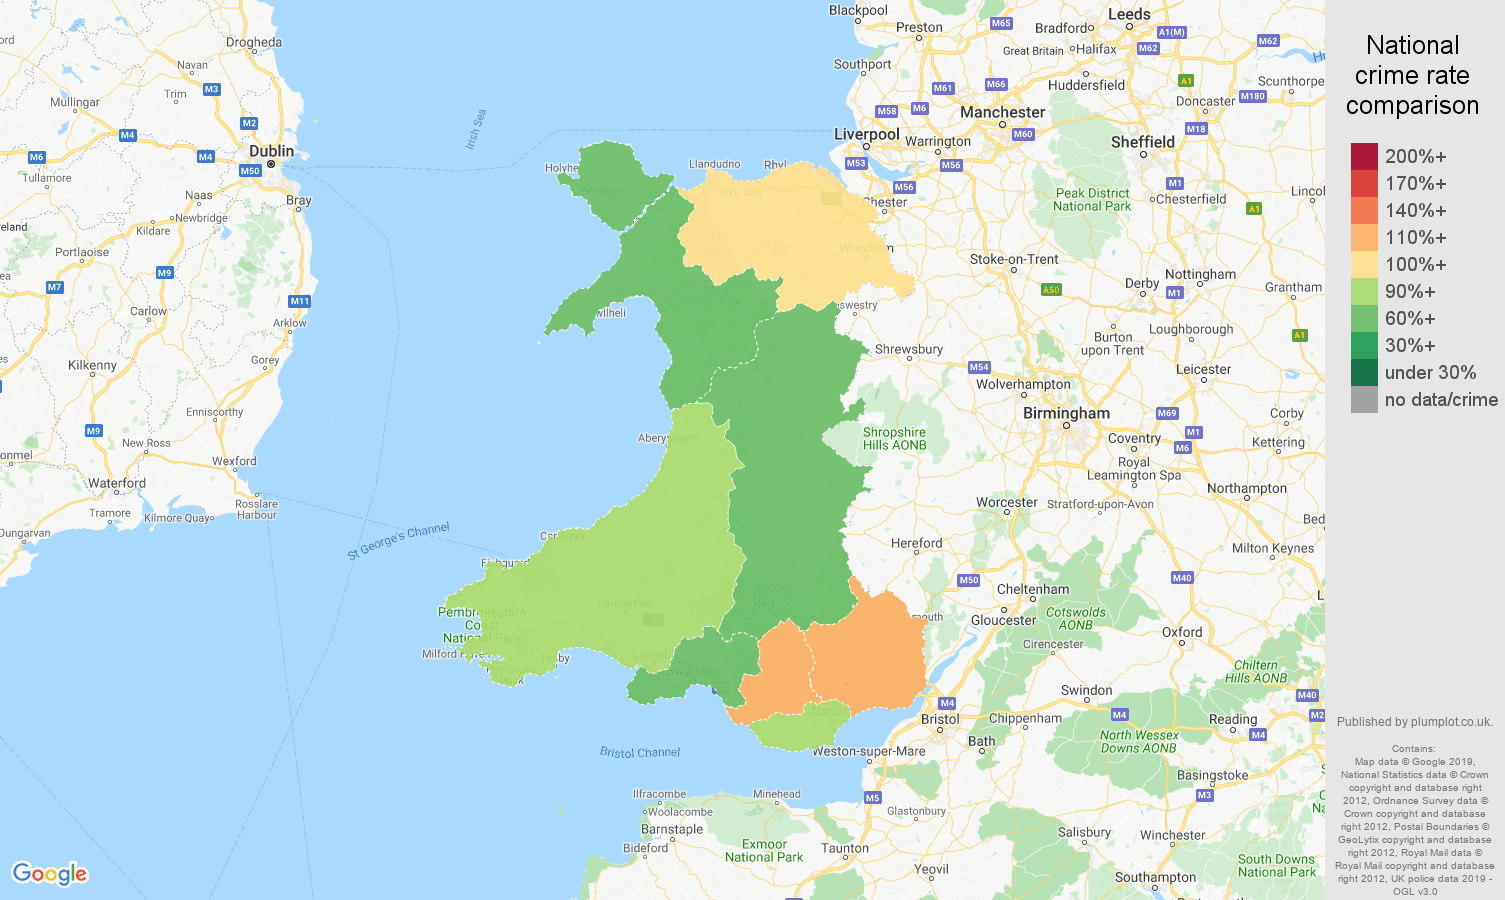 Wales other crime rate comparison map